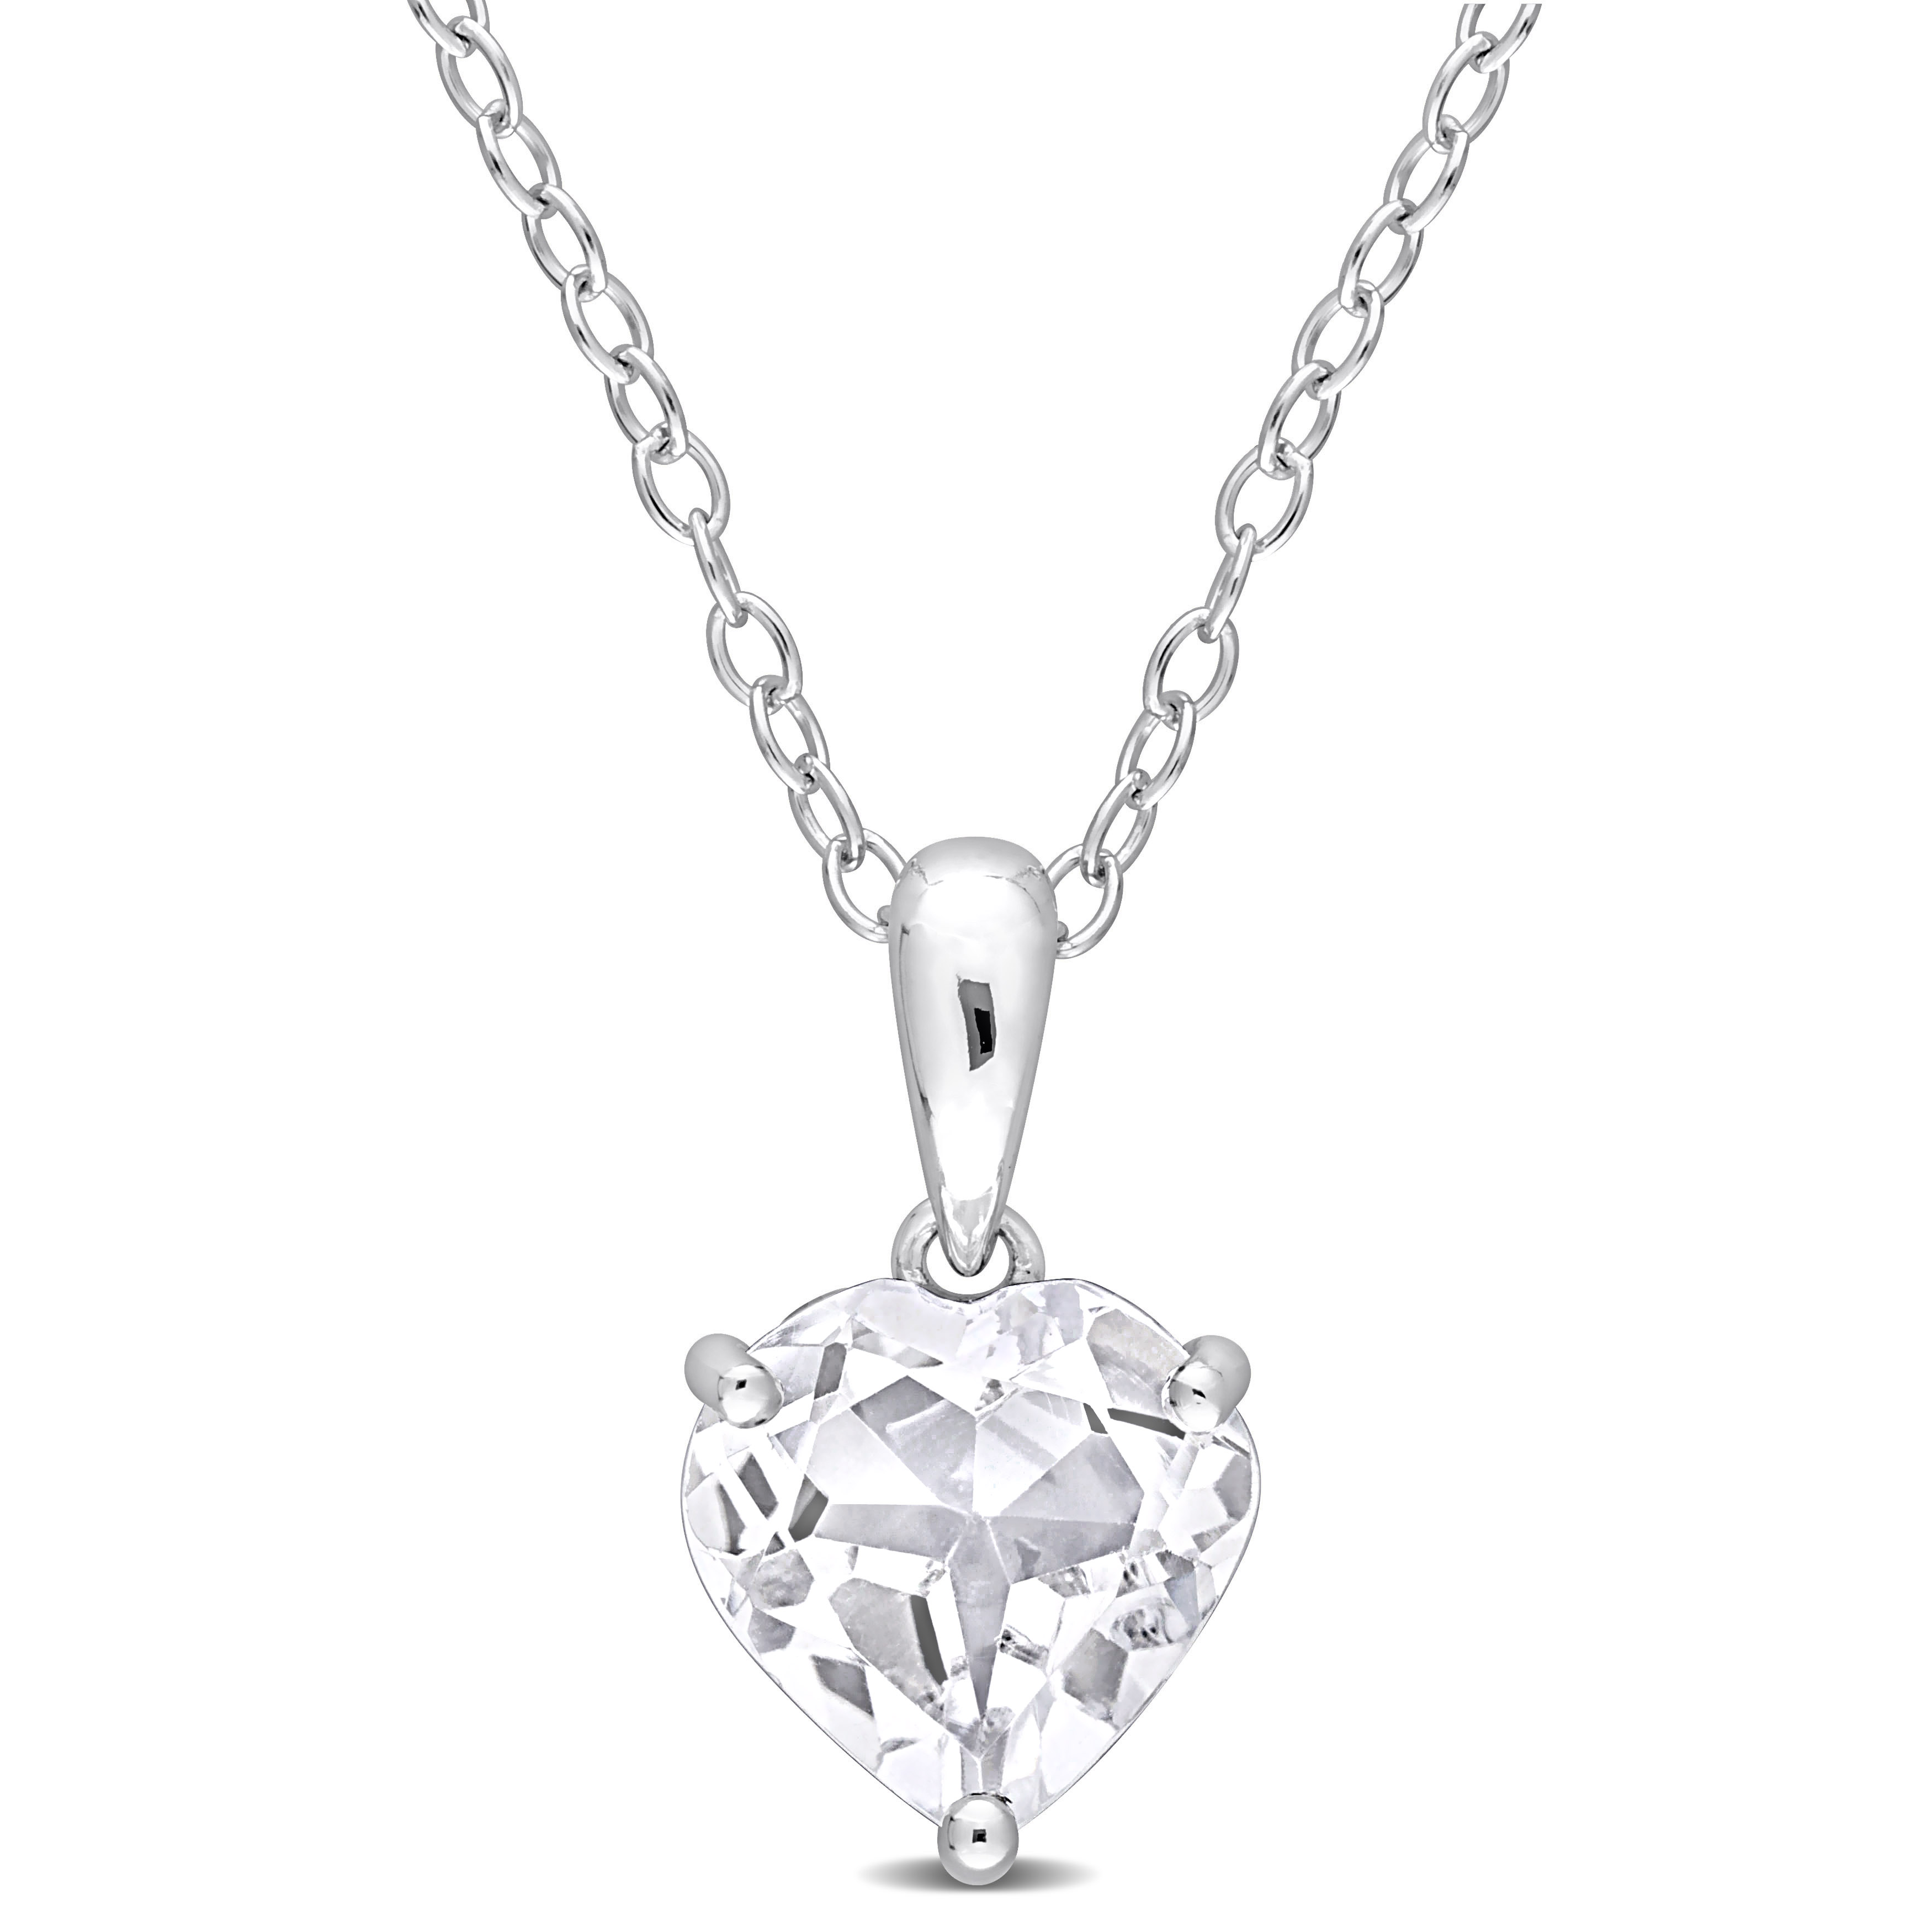 2 1/5 CT TGW Heart Shape White Topaz Solitaire Heart Design Pendant with Chain in Sterling Silver - 18 in.